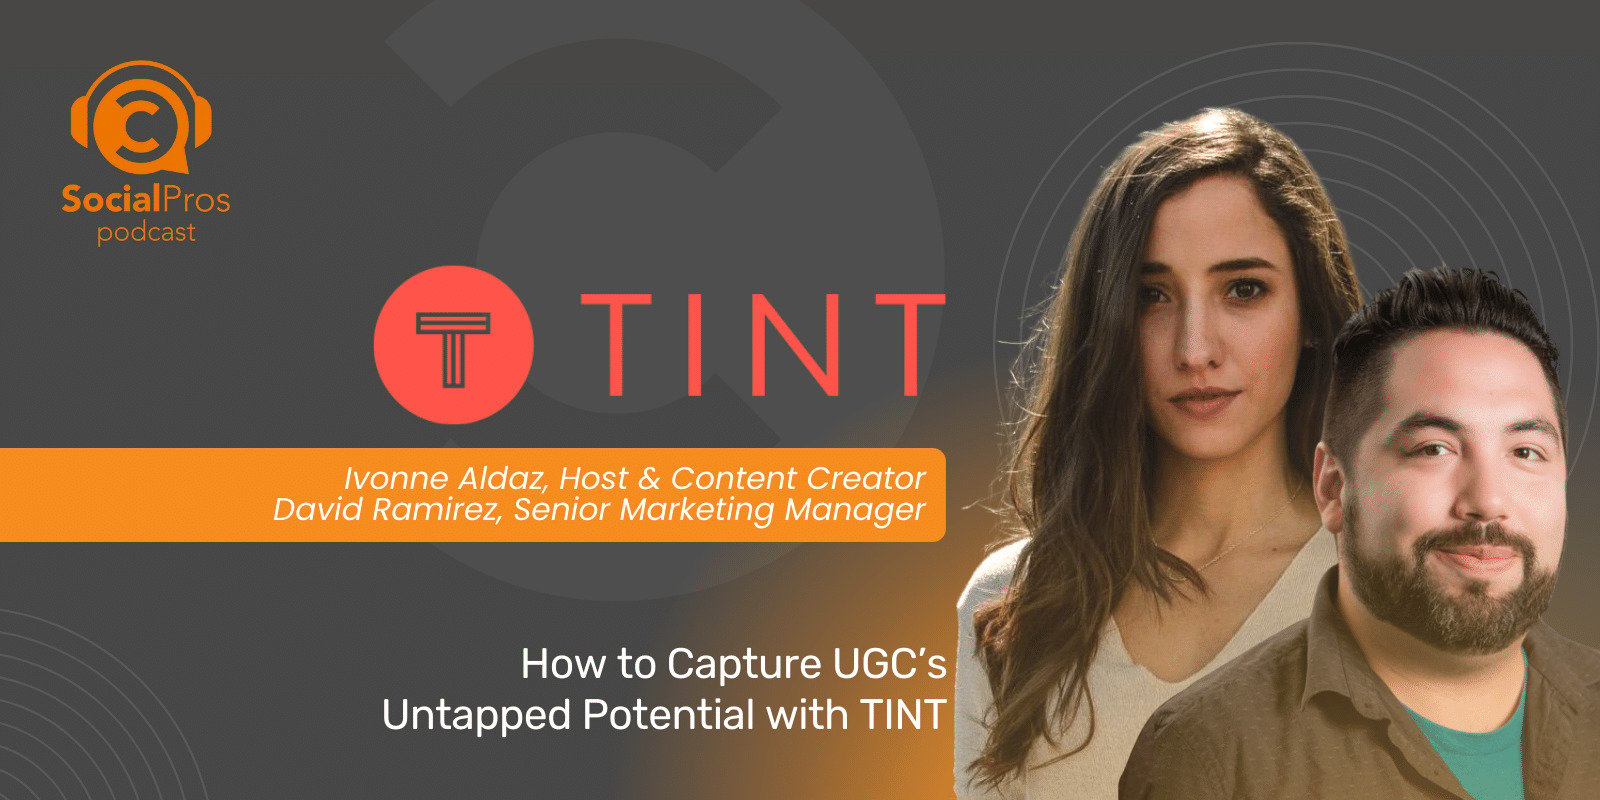 How to Capture UGC’s Untapped Potential with TINT